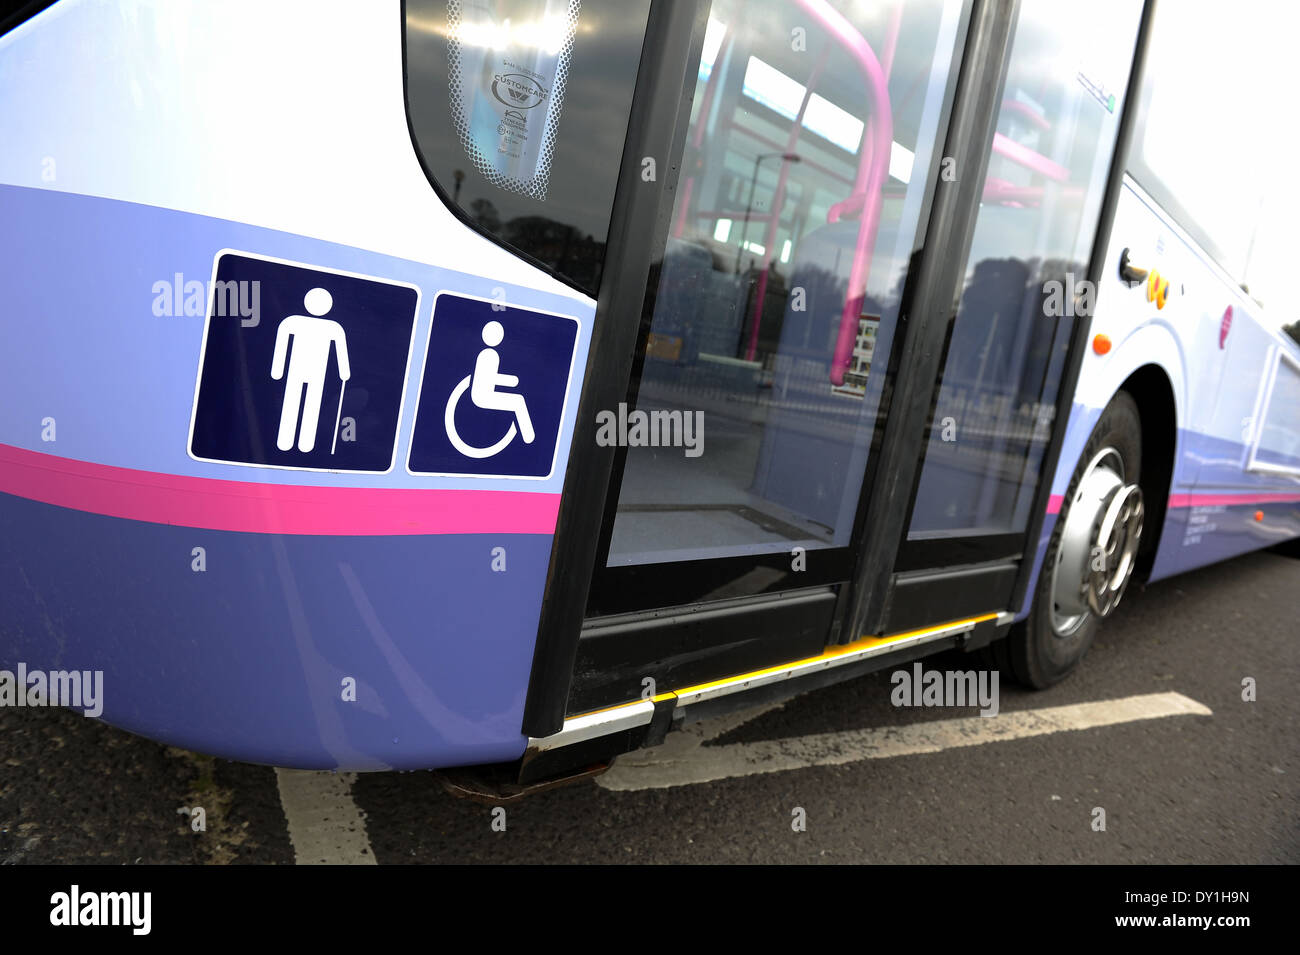 Disabled bus access, public transport bus that lowers to allow access for disabled people and wheelchairs, UK Stock Photo